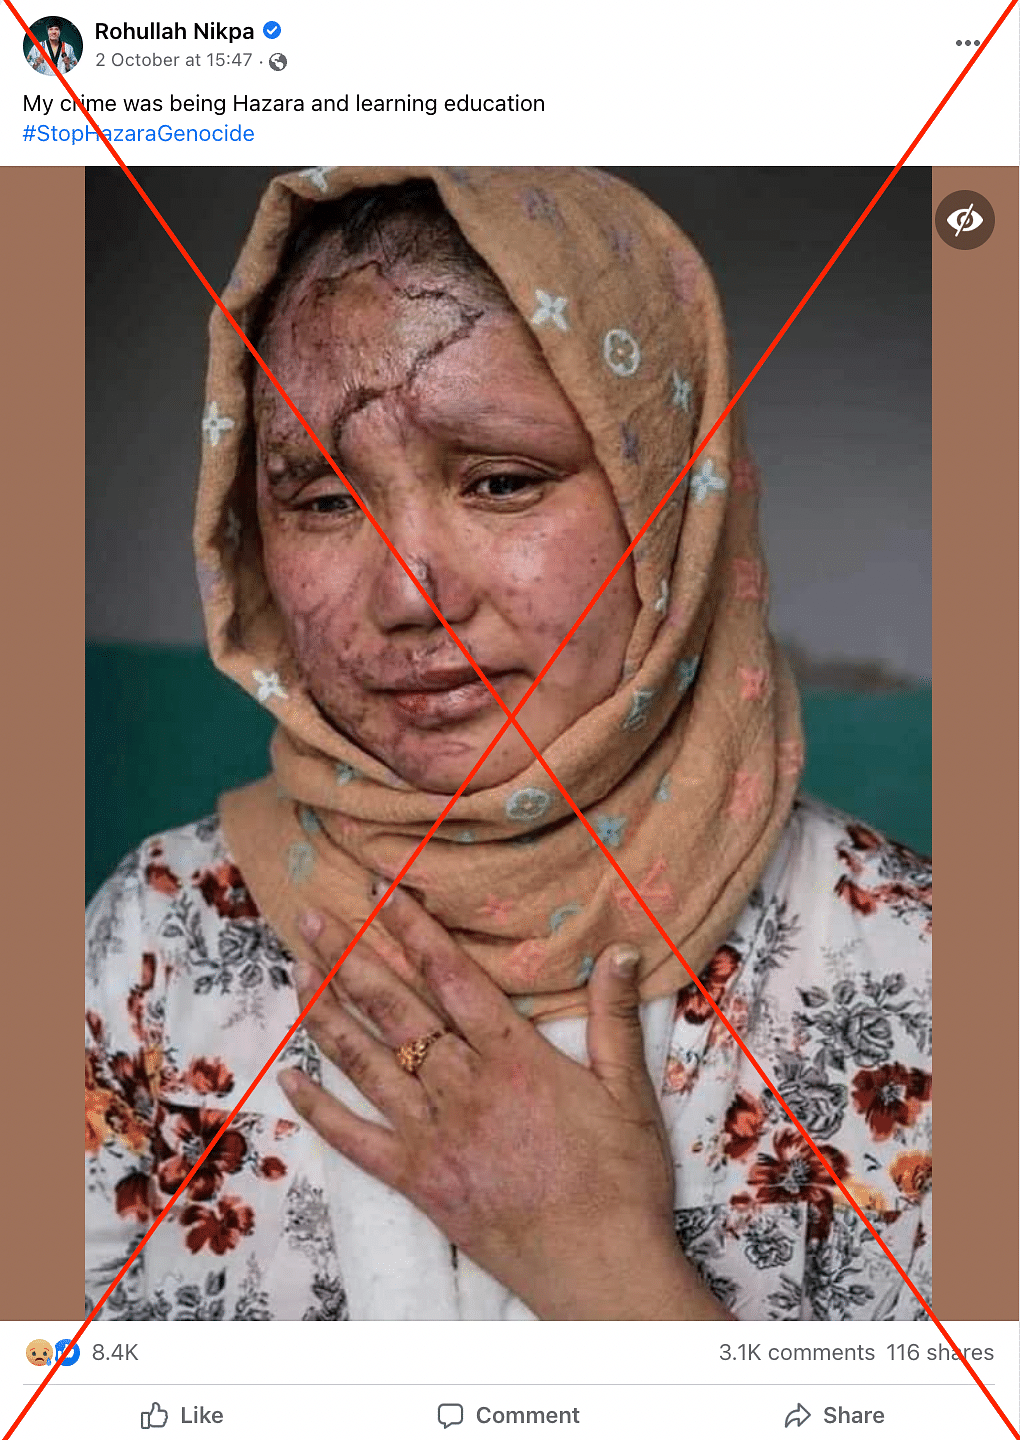 The photo is from 2016, and shows a woman who was severely injured in a suicide bombing attack on 20 January 2016.